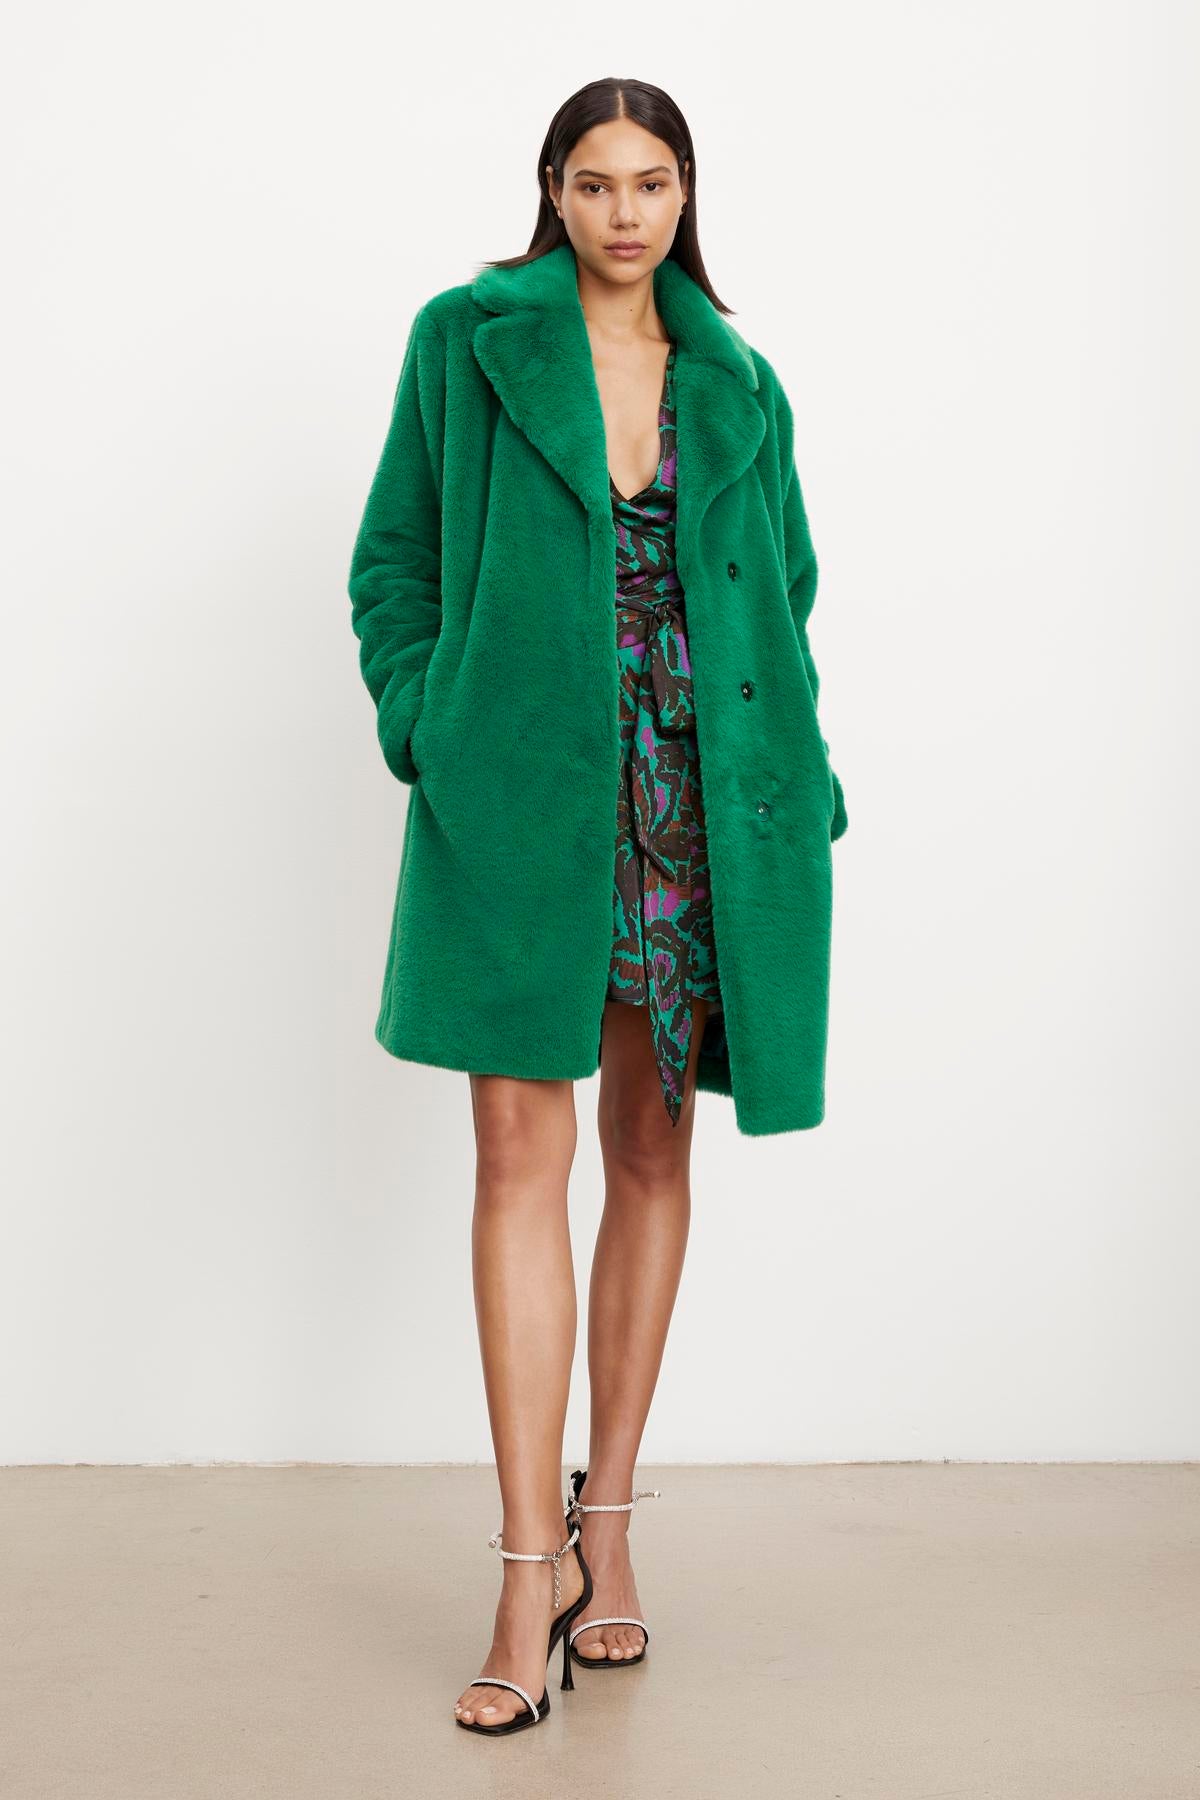 The model is wearing a green Velvet by Graham & Spencer EVALYN LUX FAUX FUR COAT.-35624128381121